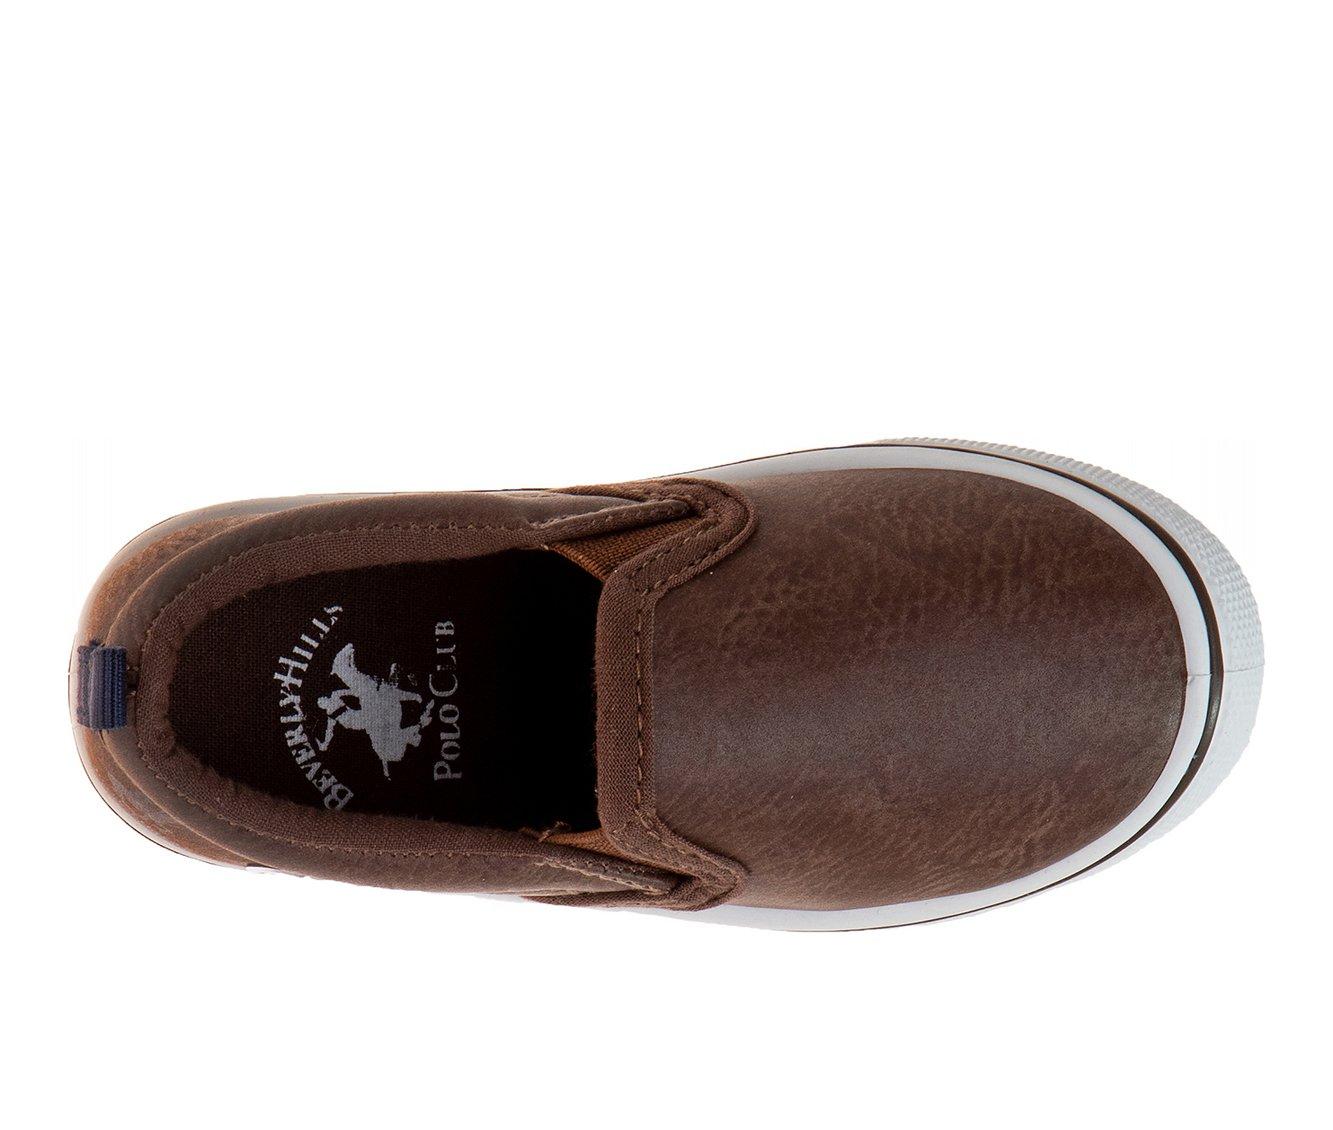 Boys' Beverly Hills Polo Club Toddler & Little Kid California Sneakers